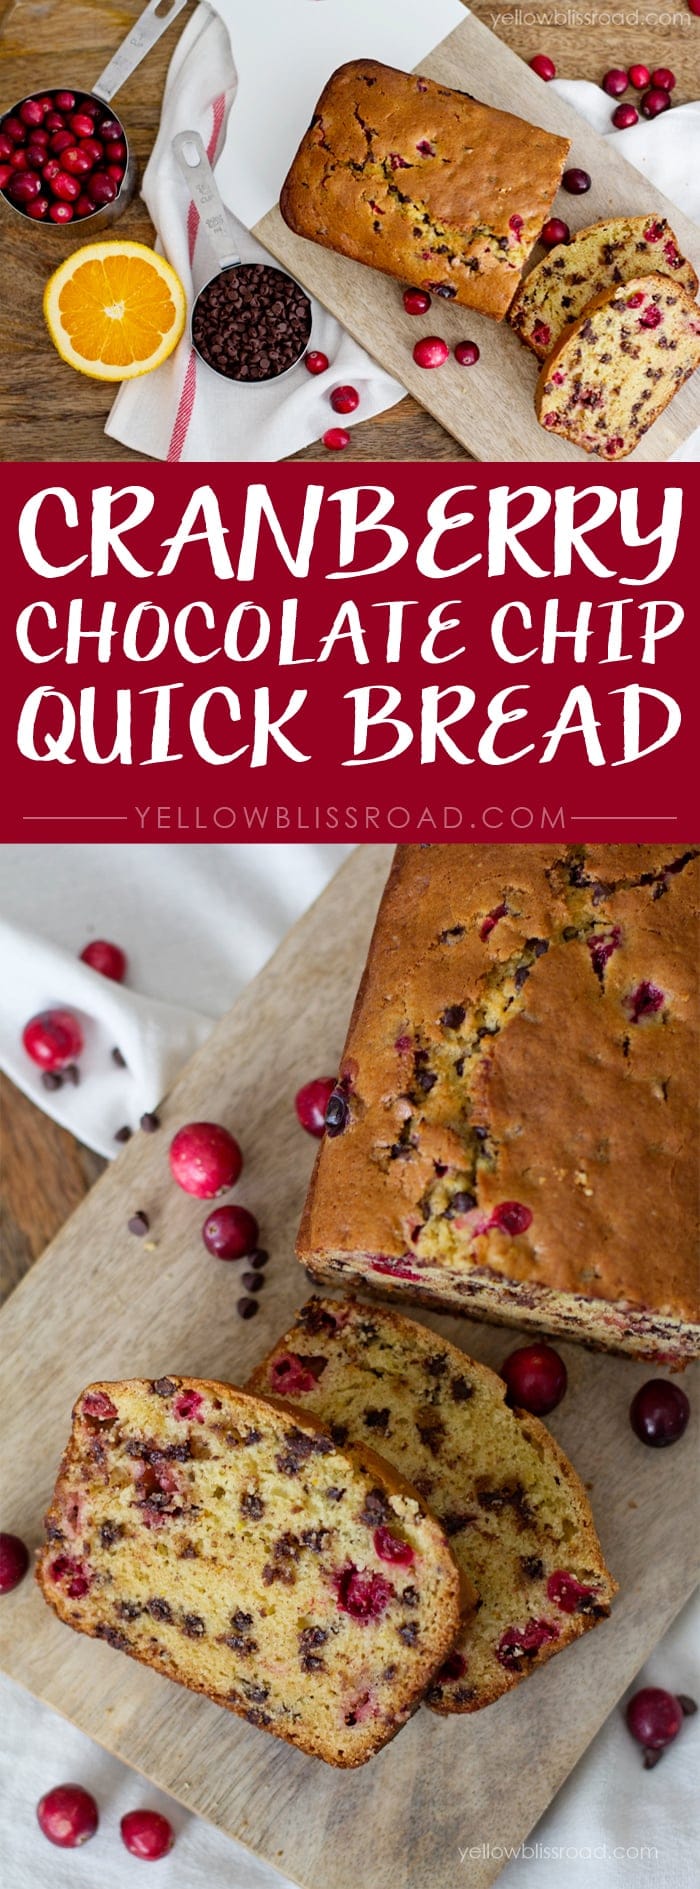 Cranberry Chocolate Chip Quick Bread